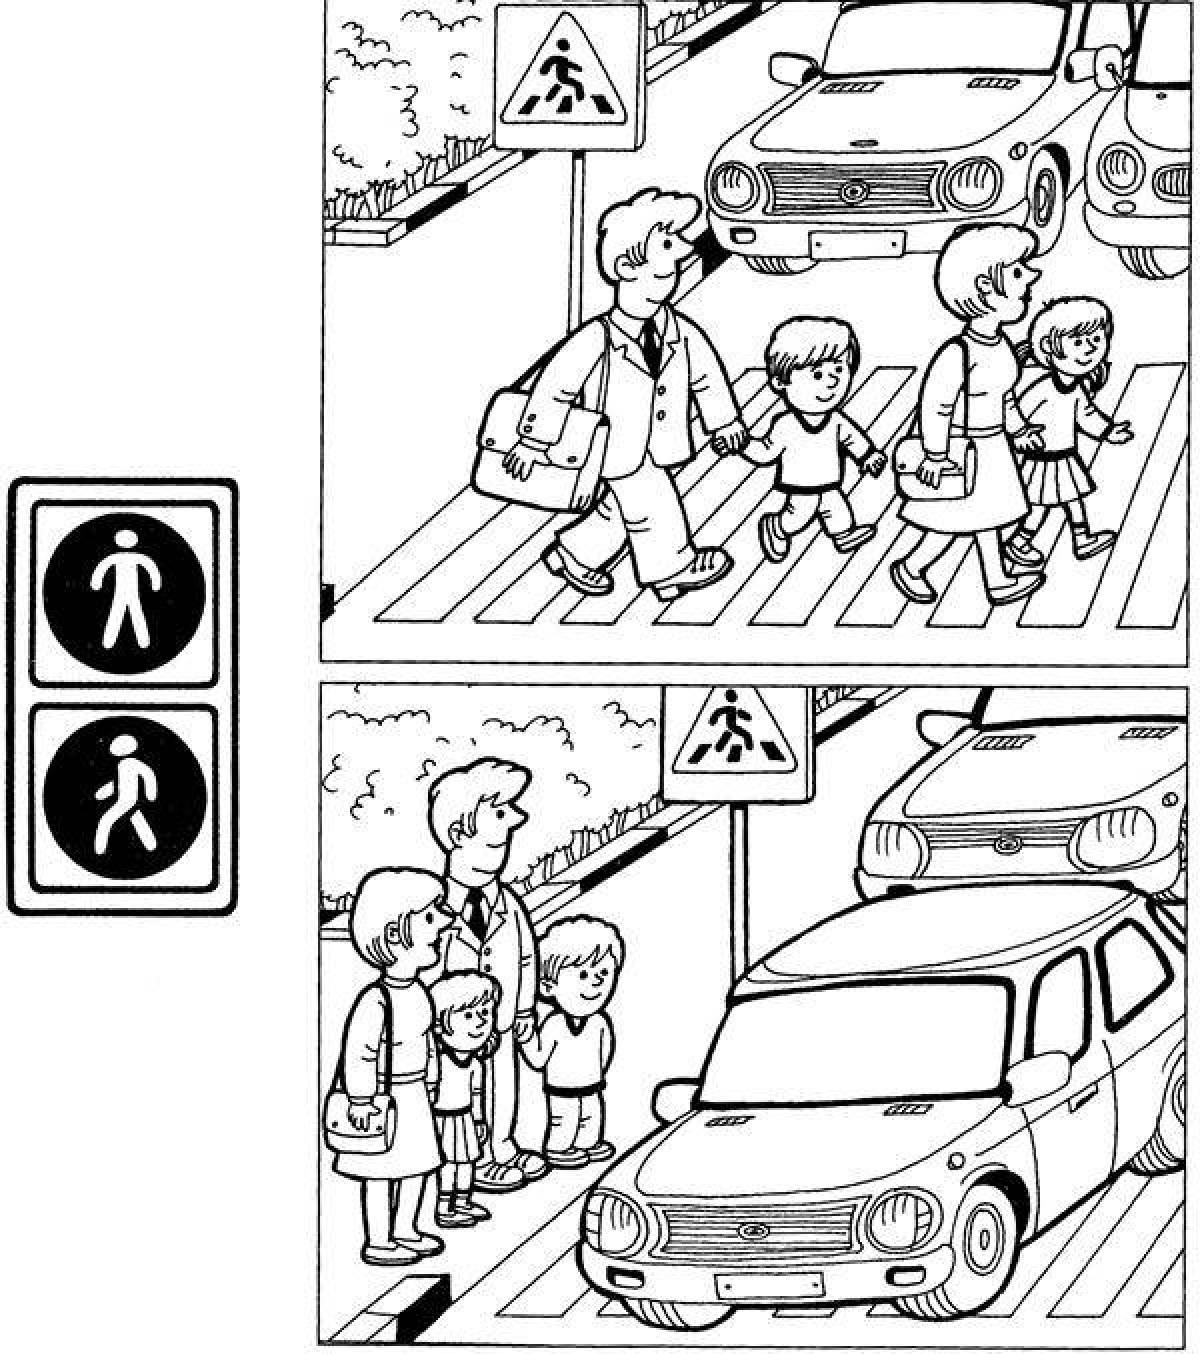 Bright rules of the road coloring for kids